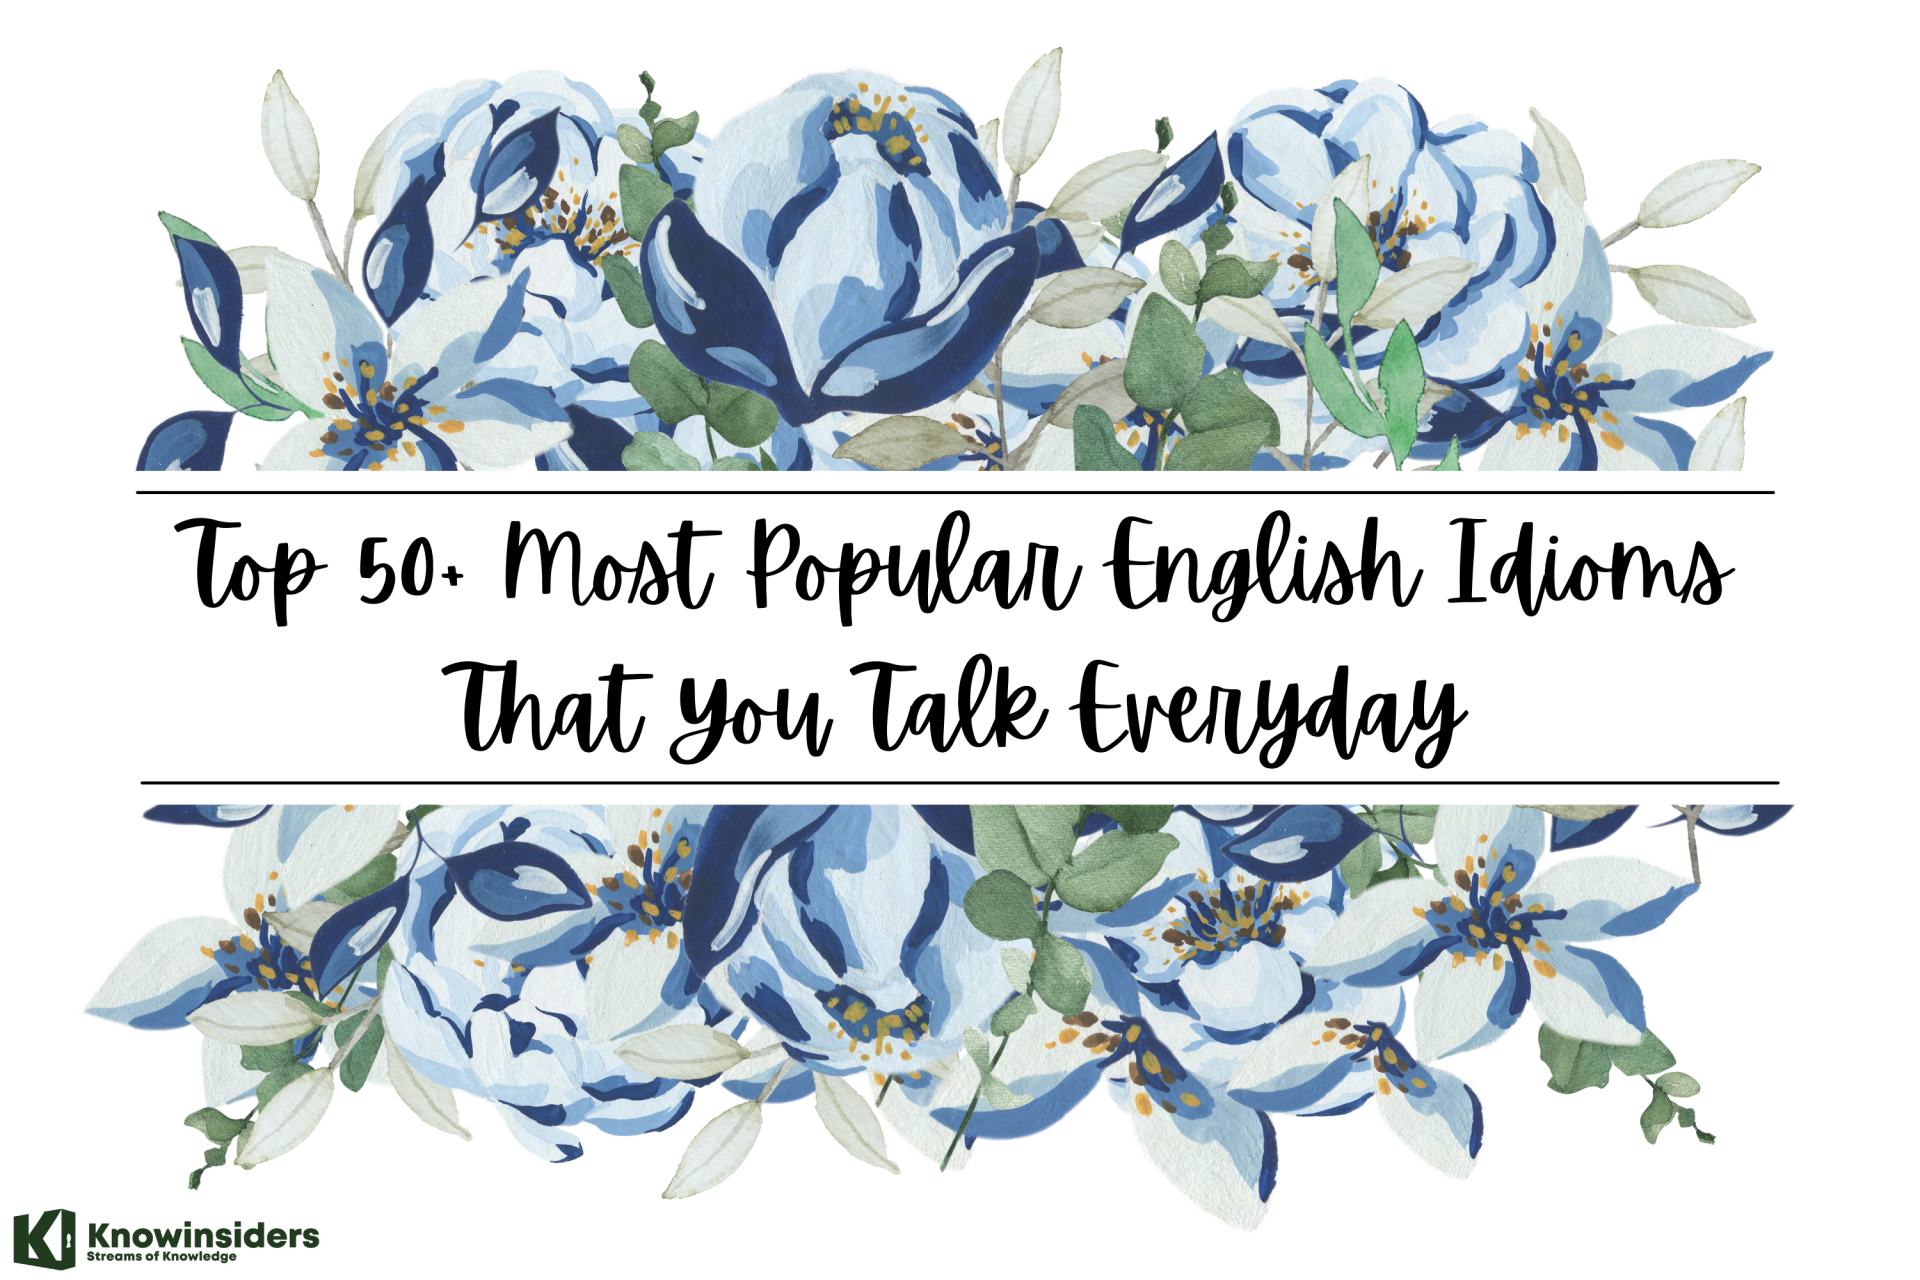 Top 50 Most Popular English Idioms That You Talk Everyday